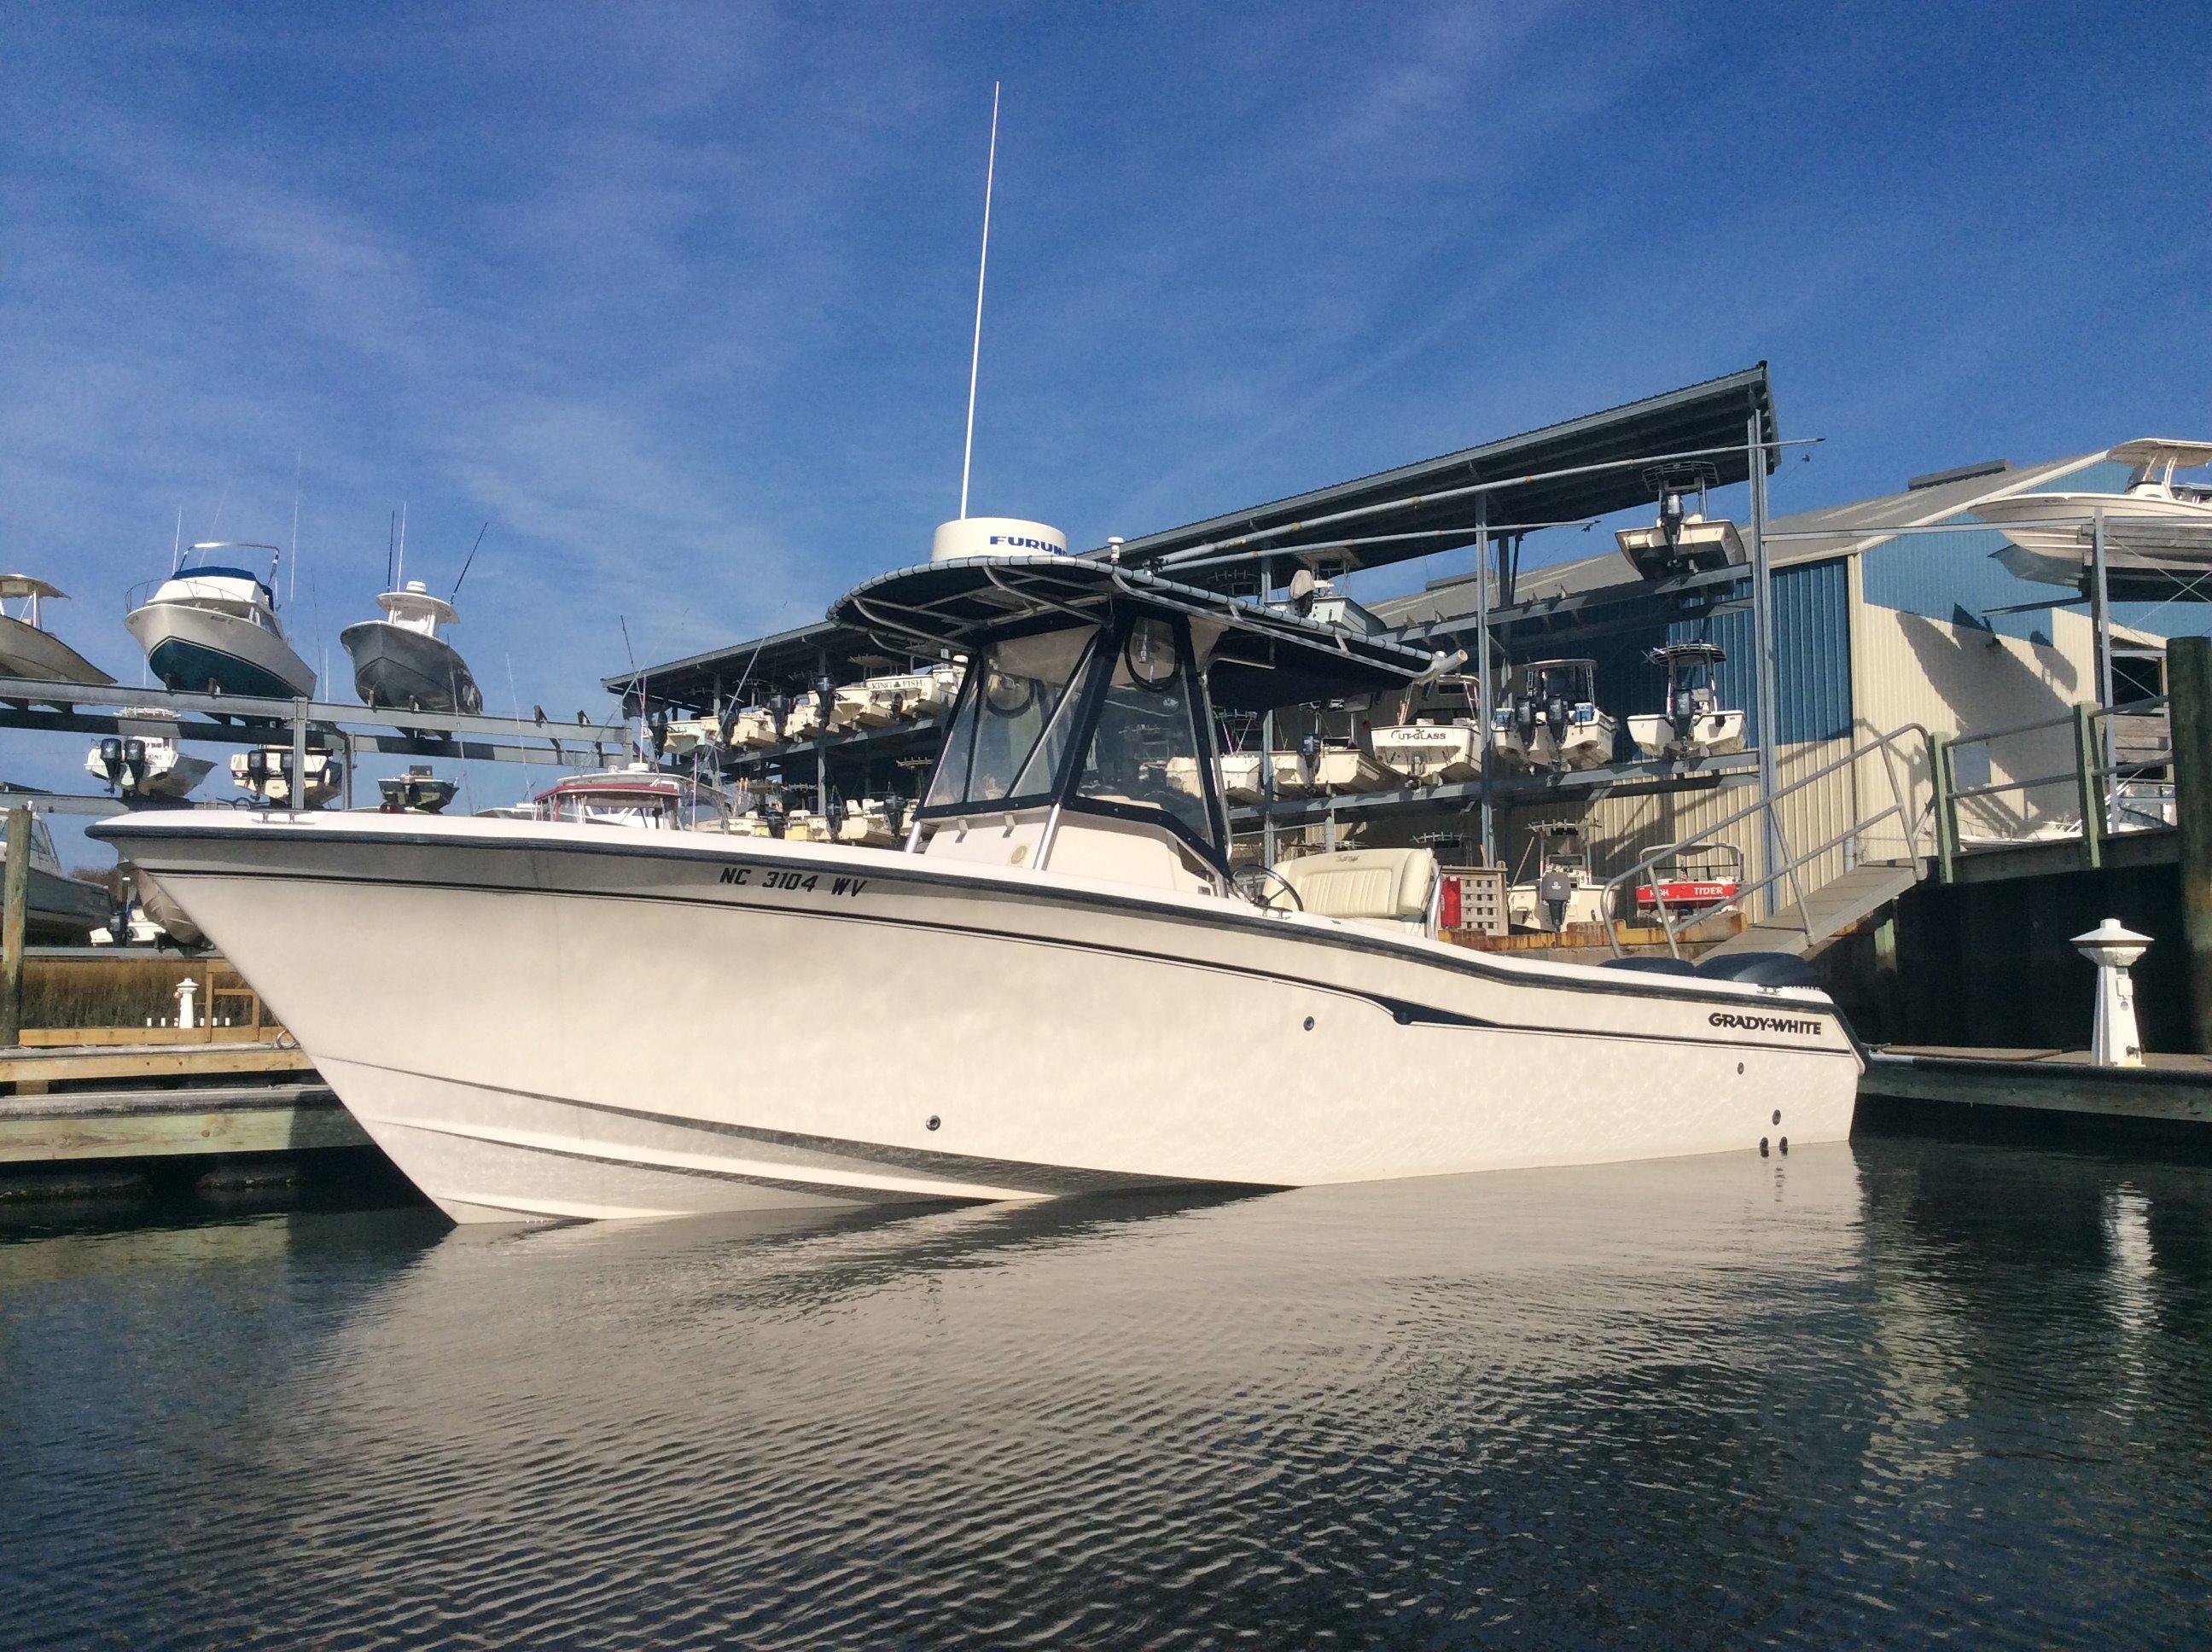 27 Foot Boats for Sale in NC Boat listings